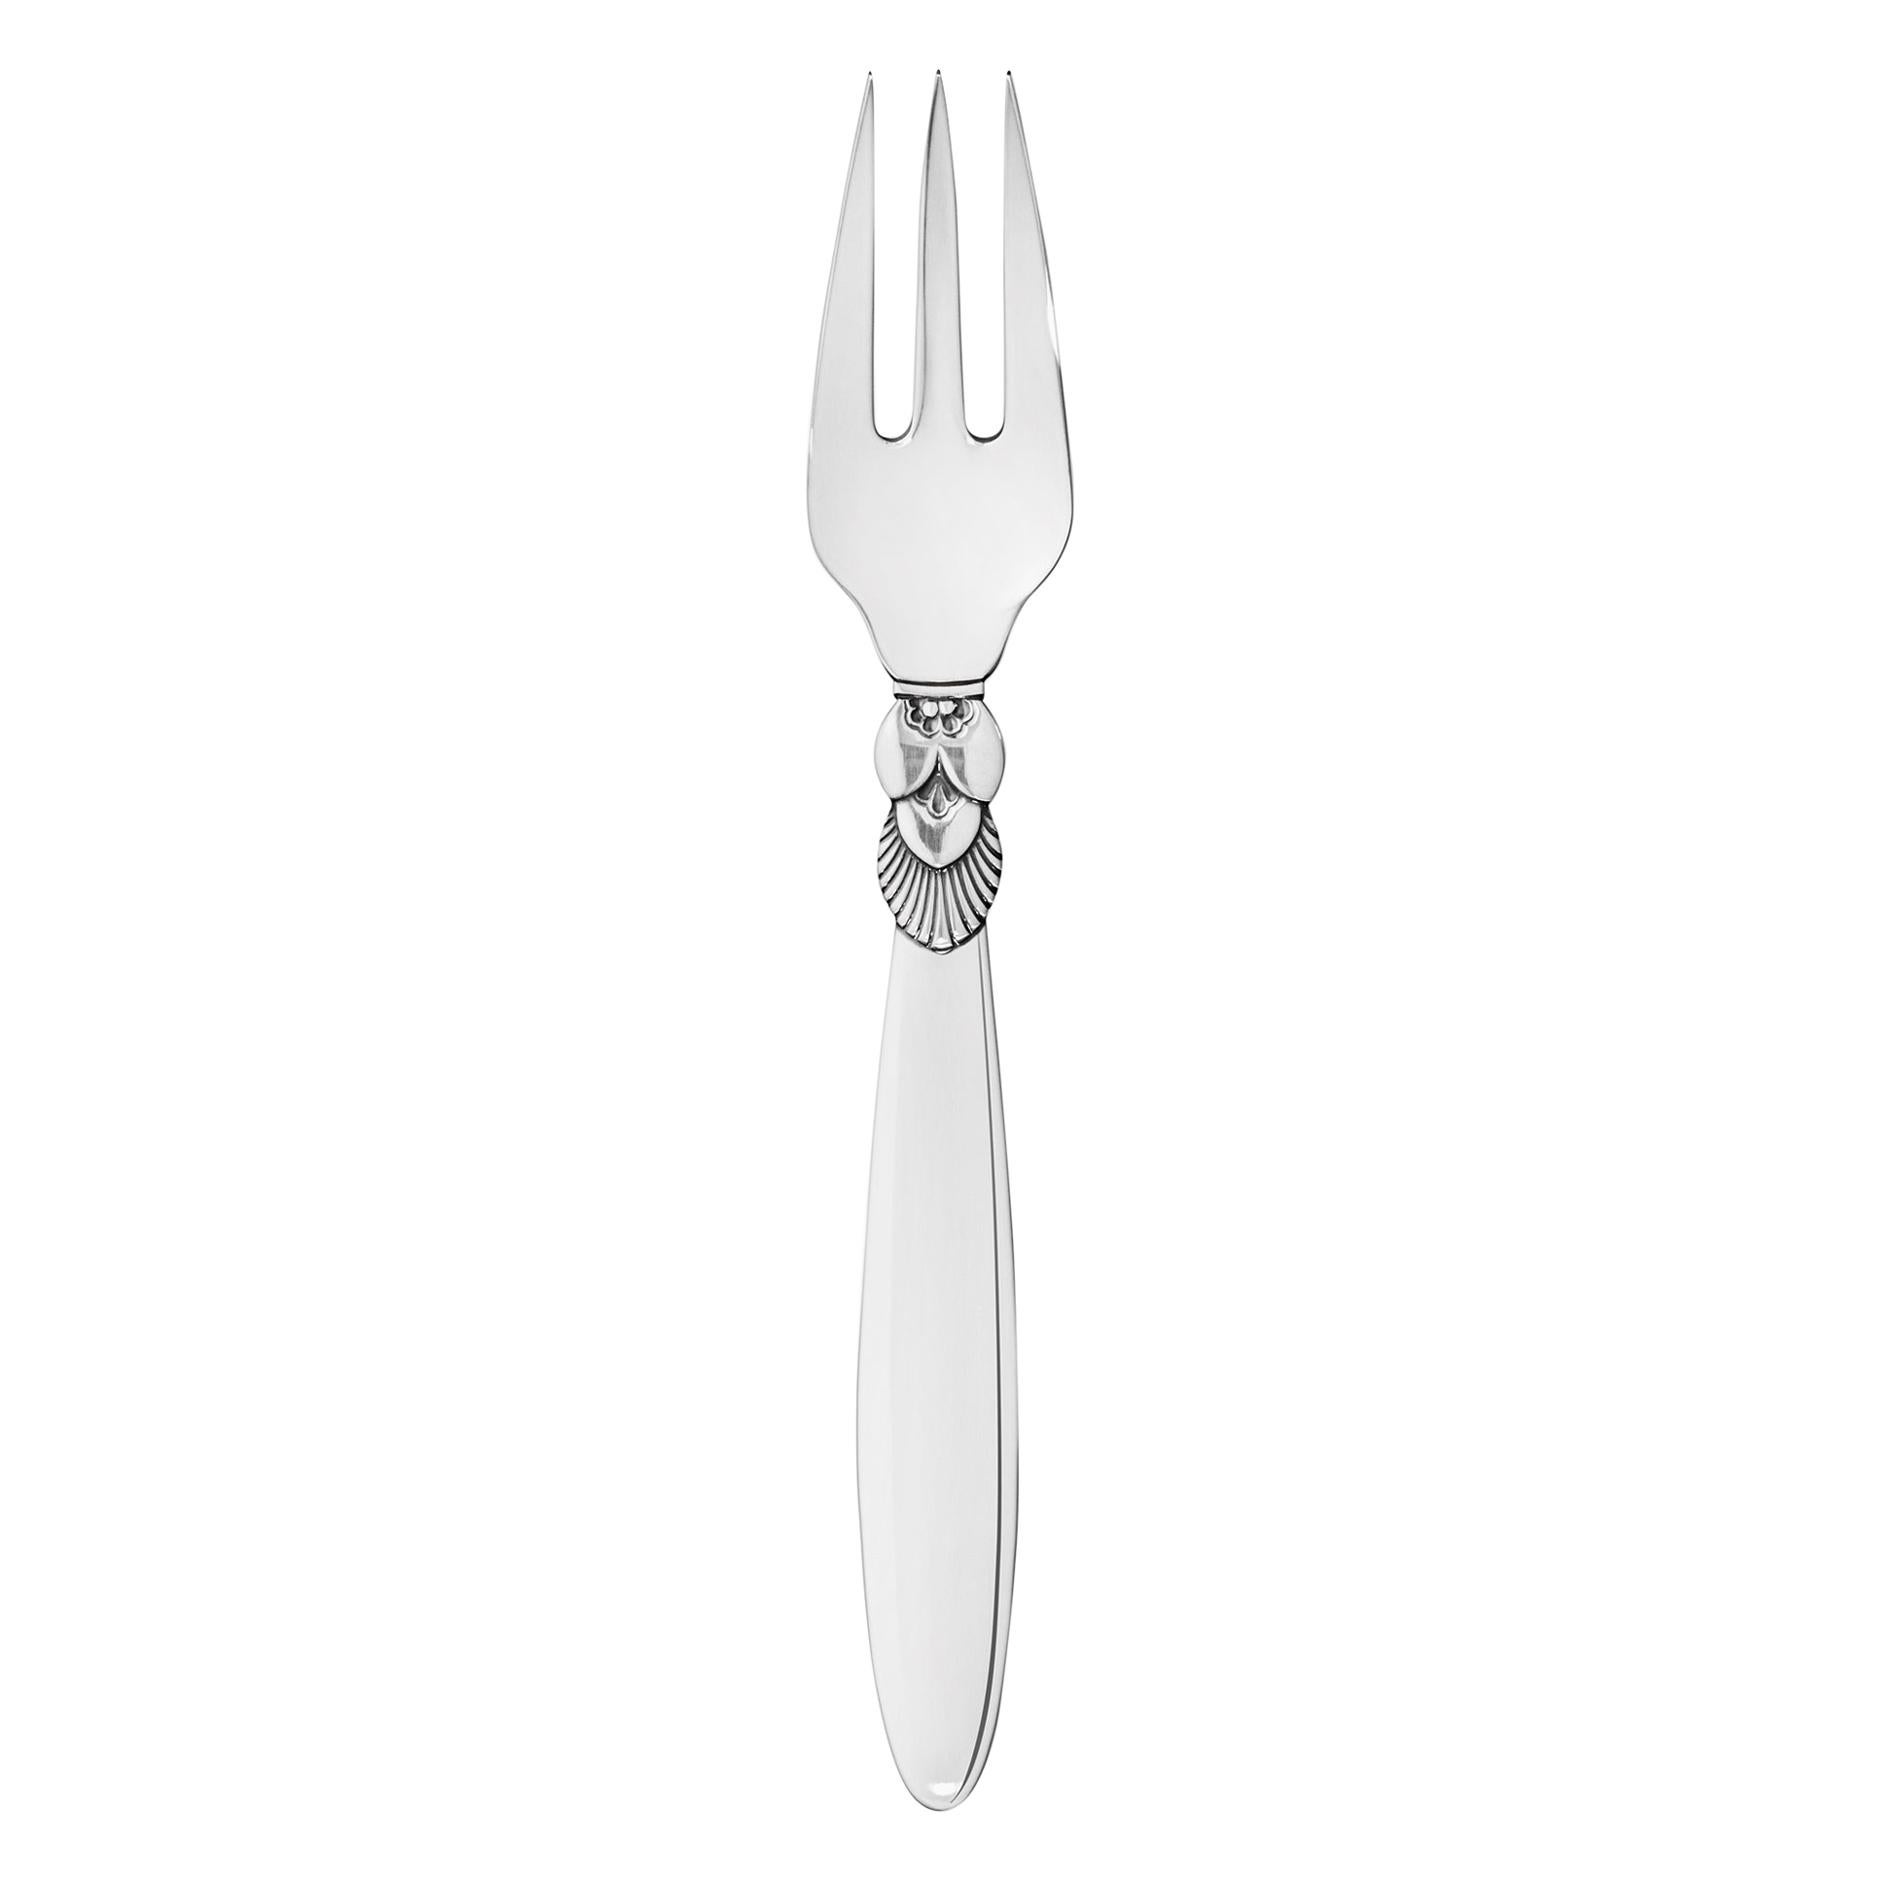 Georg Jensen Handcrafted Sterling Silver Cactus Fish Fork by Gundorph Albertus For Sale